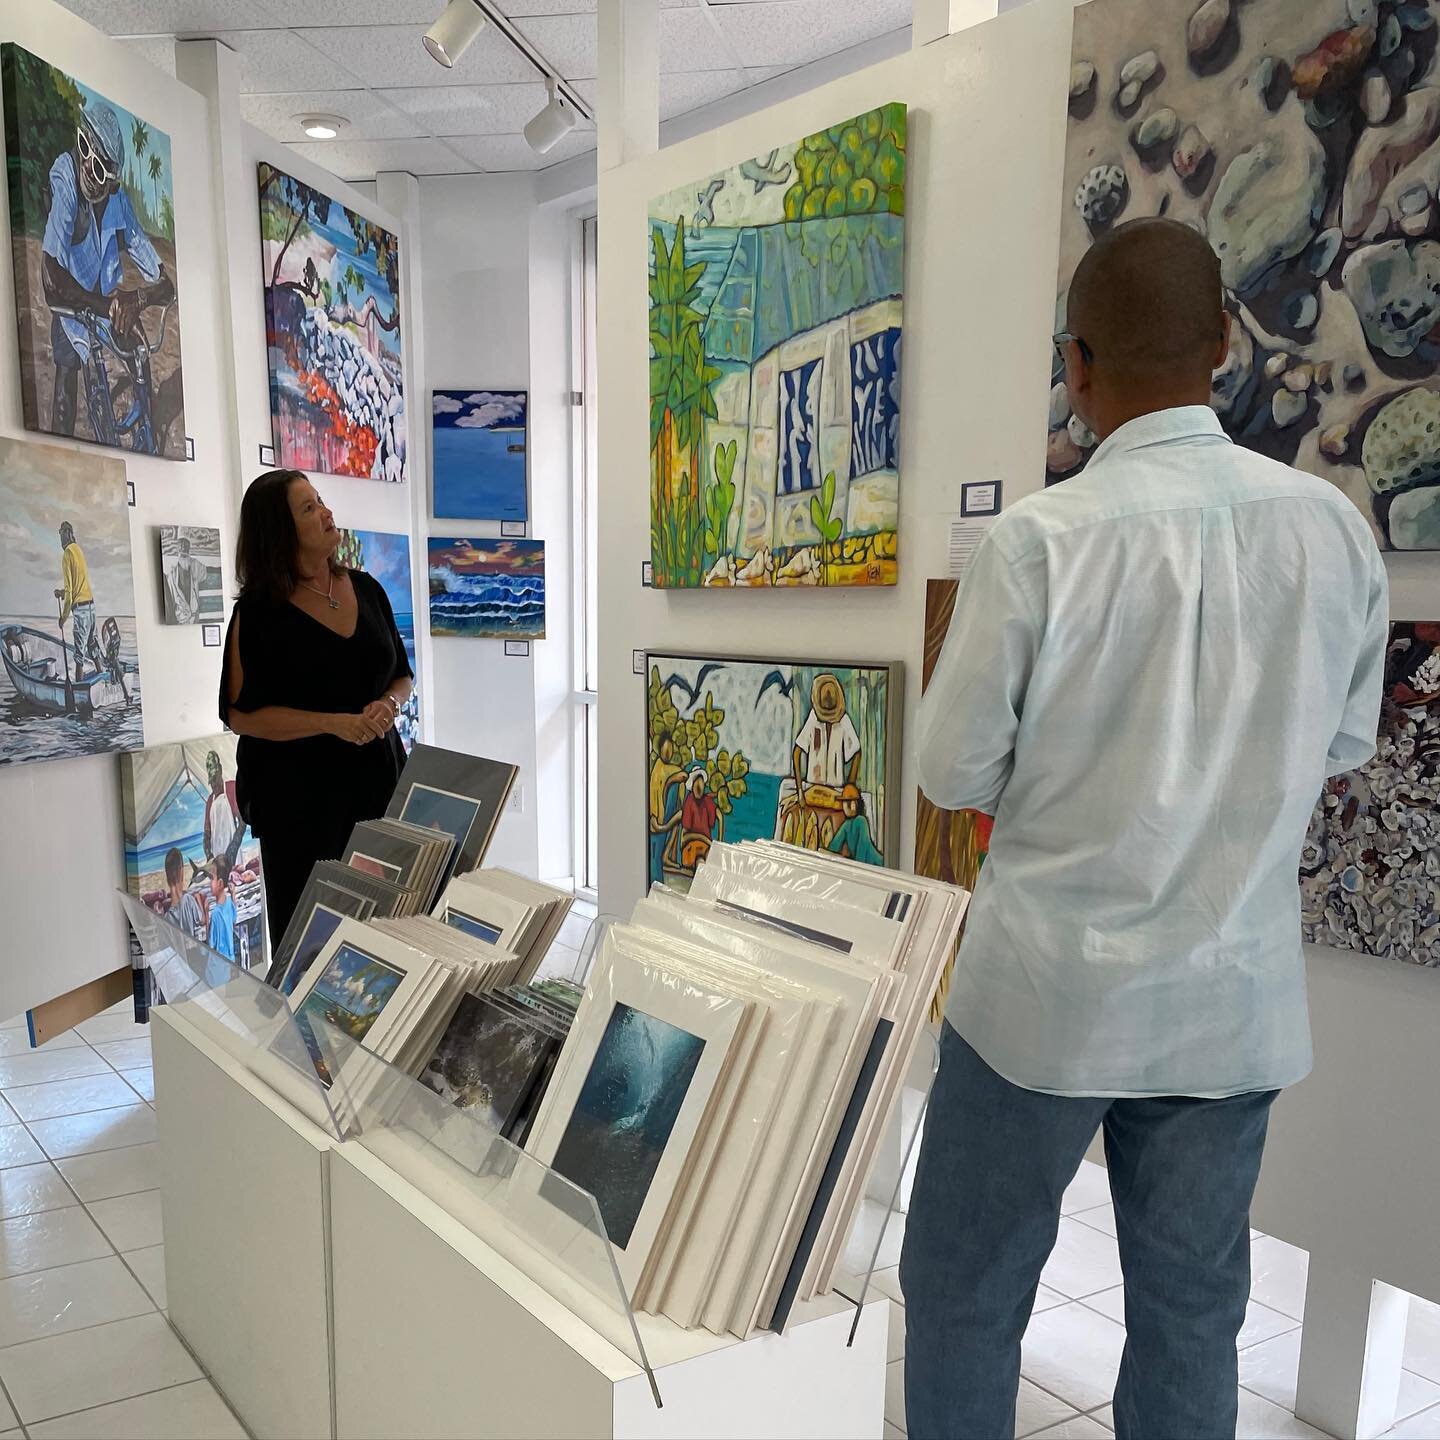 Kennedy Gallery is our gallery spotlight today, located in West Shore Mall on West Bay Road. Known for its depictions of tropical landscapes and ocean scenes captured in a range of mediums, Kennedy Gallery is one of Cayman's longest running art galle